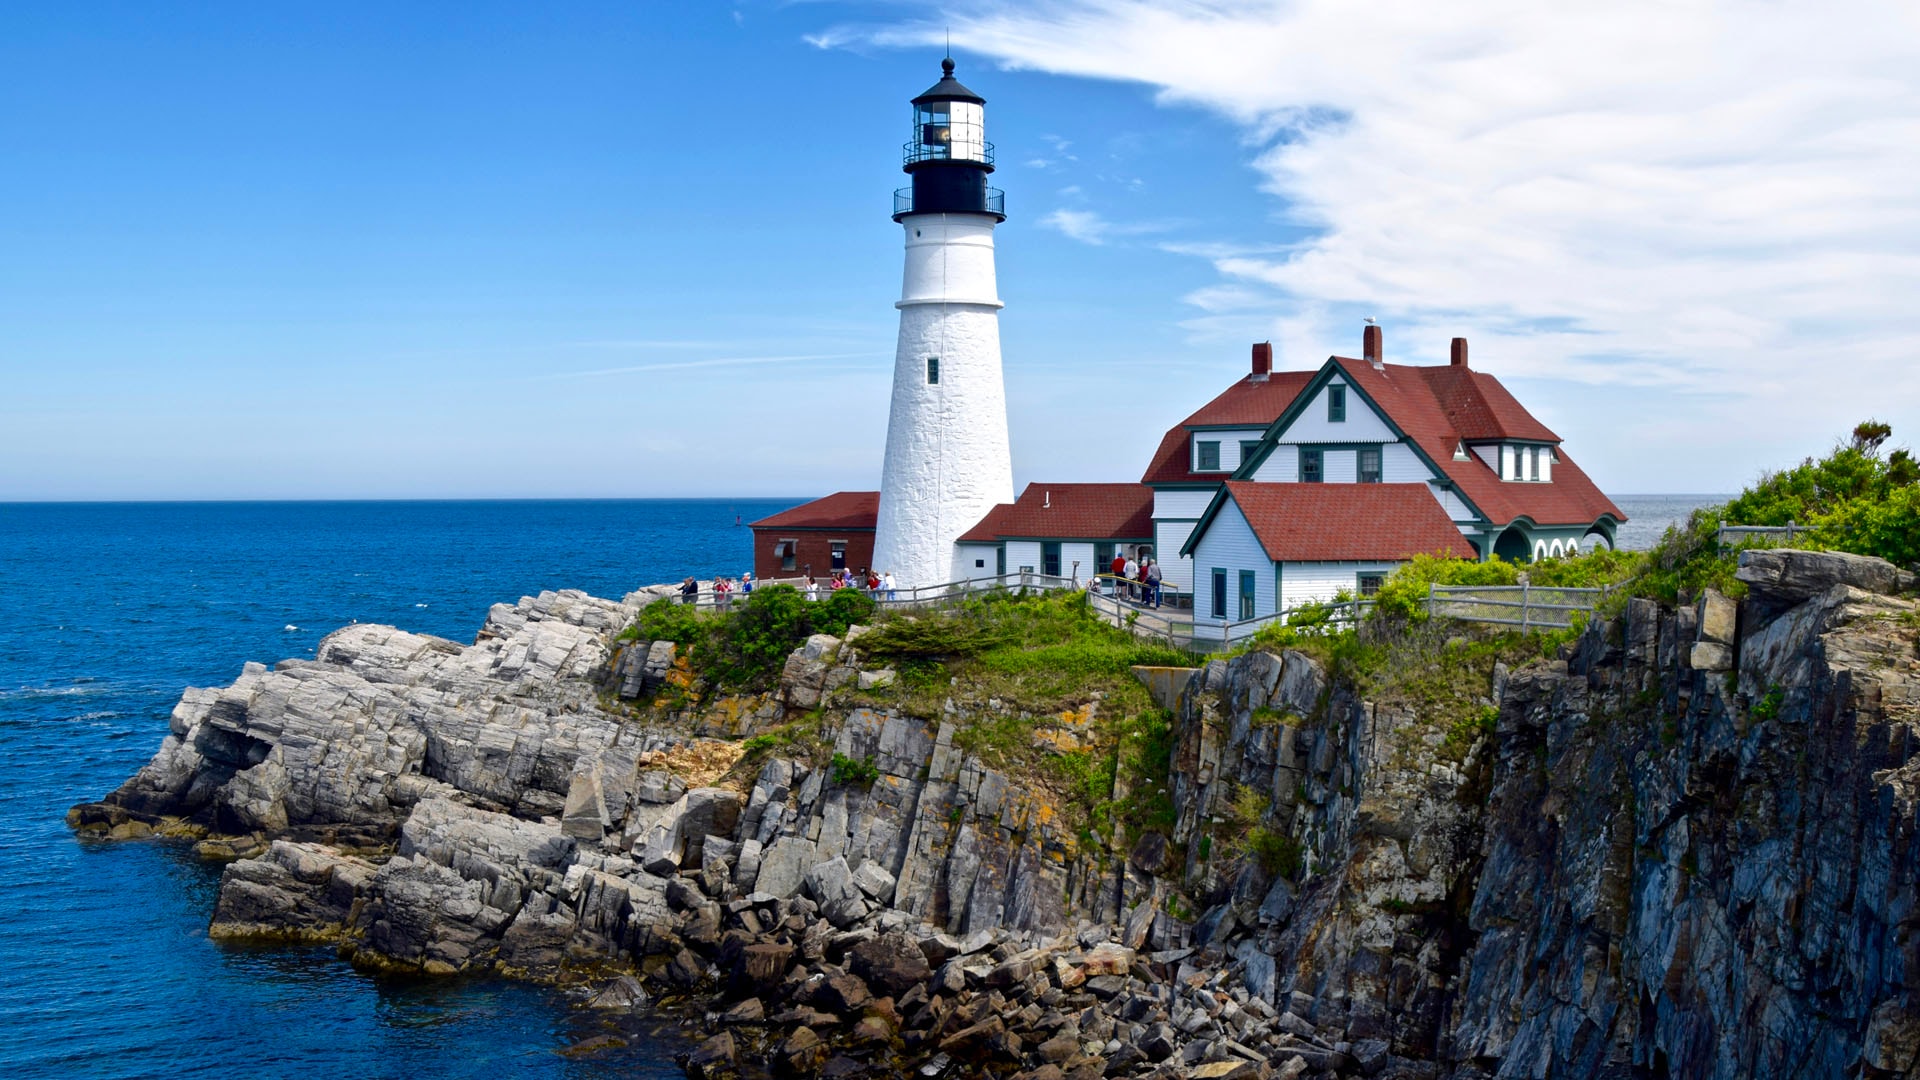  The Portland Head Light dates back to 1791. It is reportedly the first lighthouse built by the U.S. government.